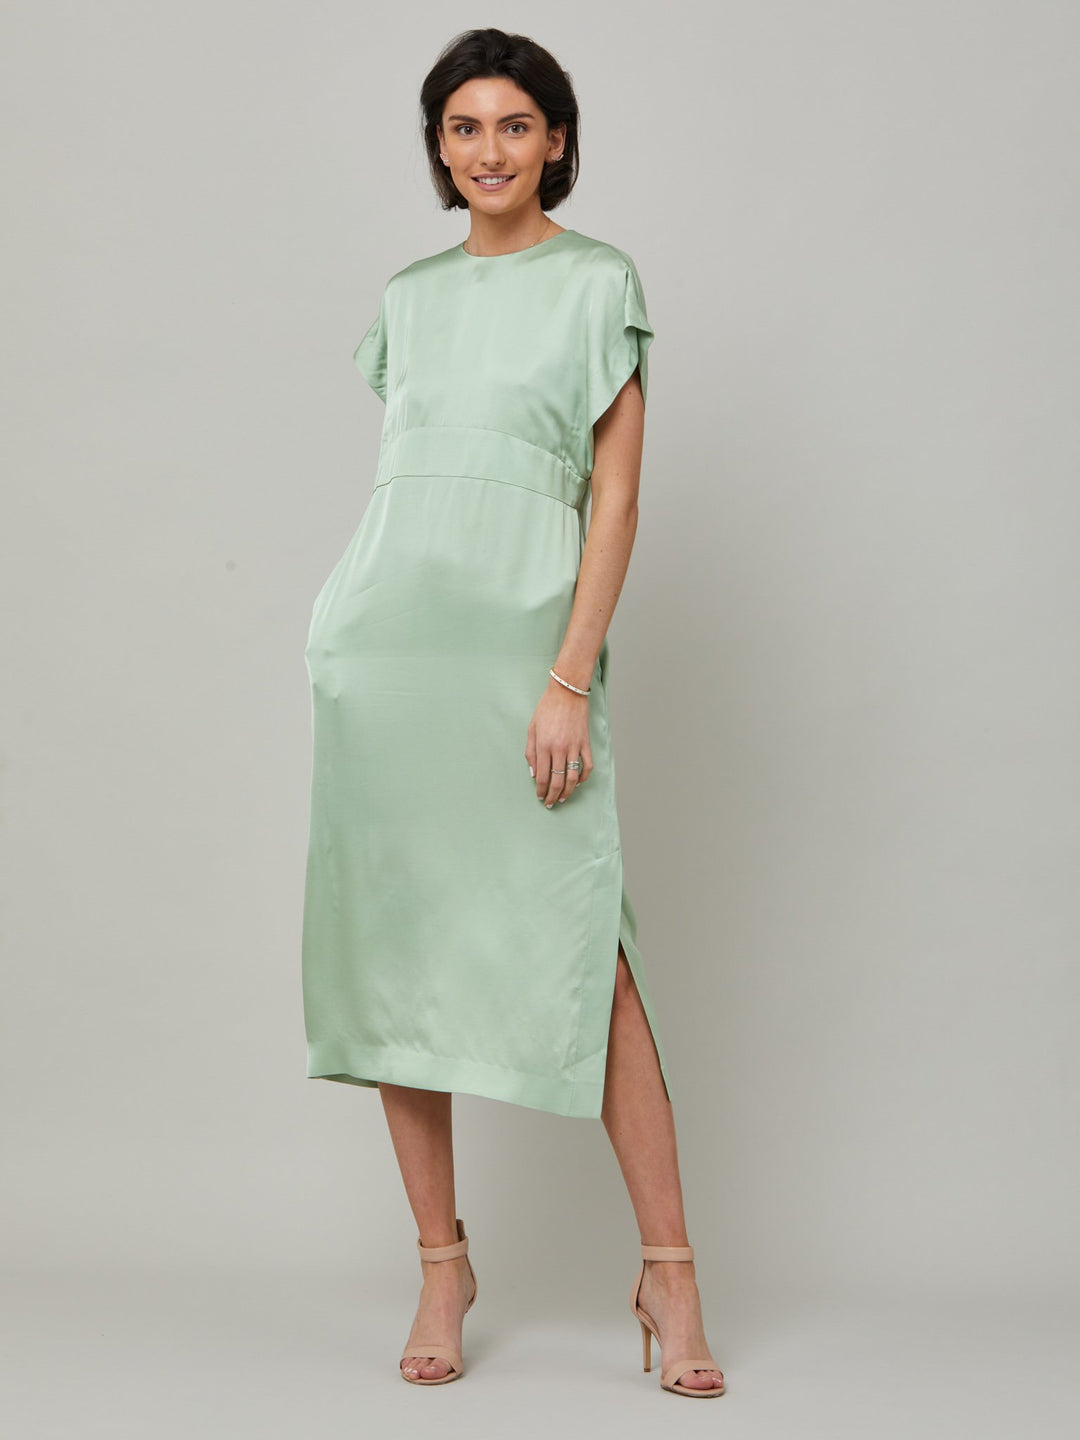 Classic occasion wear, modernized. Meet the Shiv dress in luxurious tea green satin viscose. An easy-fitting silhouette that falls to the mid-calf and features side slit, pockets, and an elegant key-hole back neck detail. . Attending a summer wedding? Mother of the bride? Heading to the races? This is the dress for you. Designed in Ireland by Helen McAlinden. Made in Europe. Free shipping to the EU & UK.